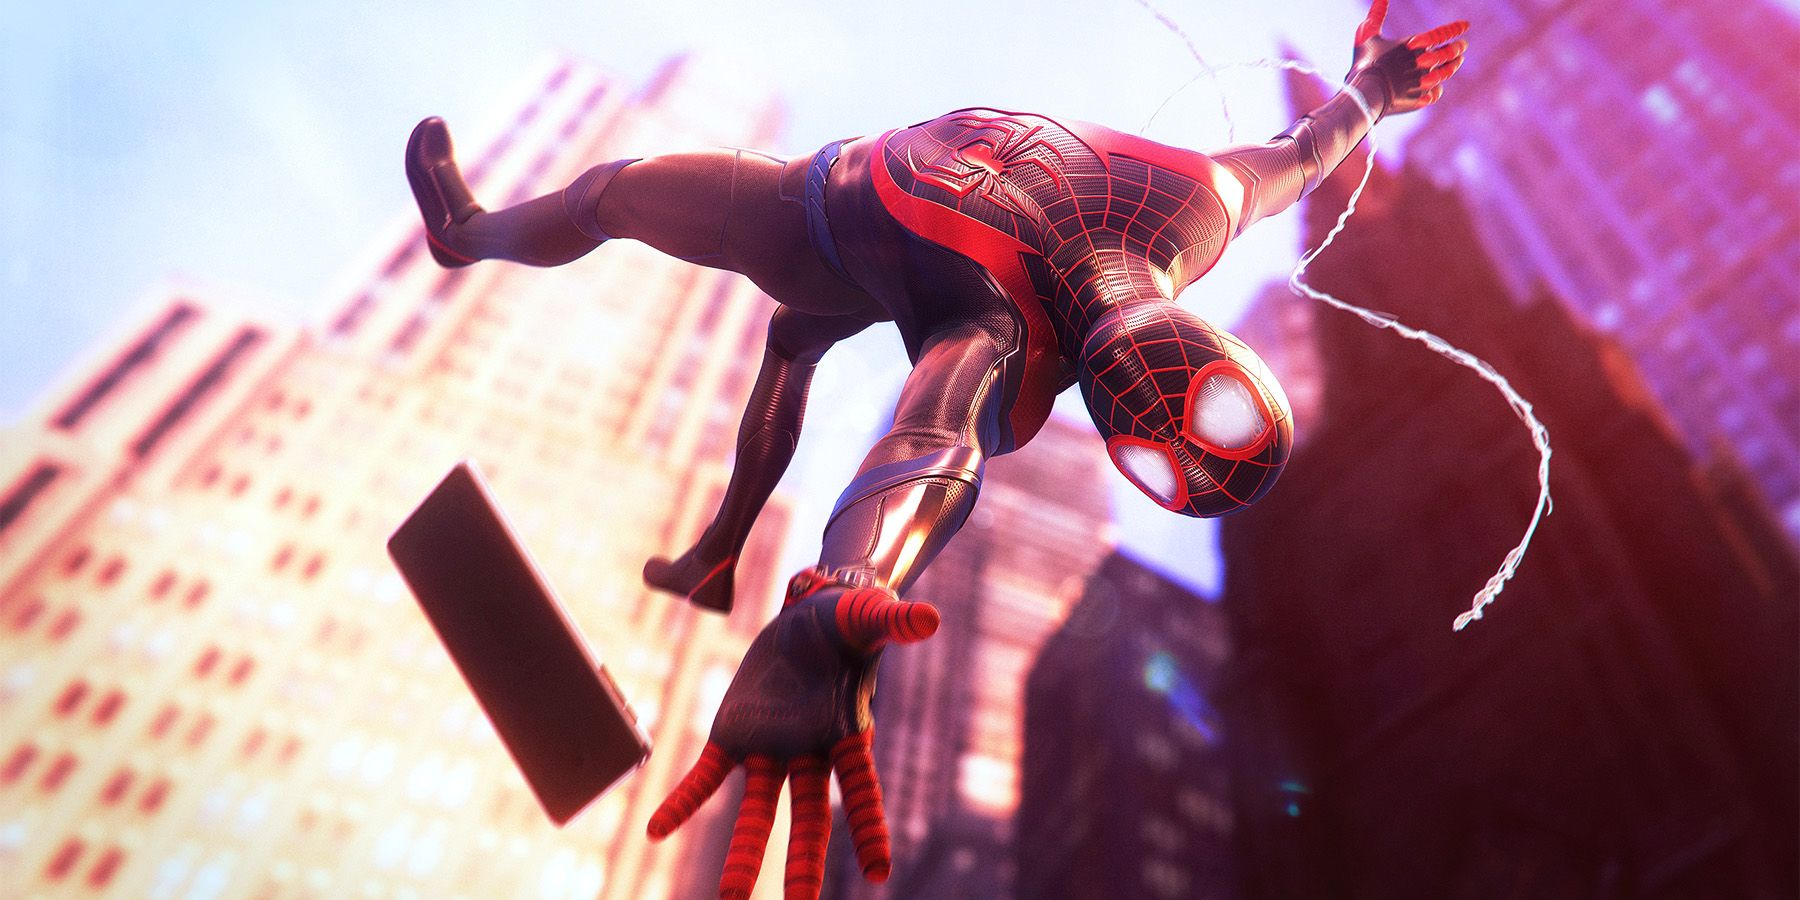 Spider-Man: Miles Morales Isn't a Sequel, But a Smaller Standalone